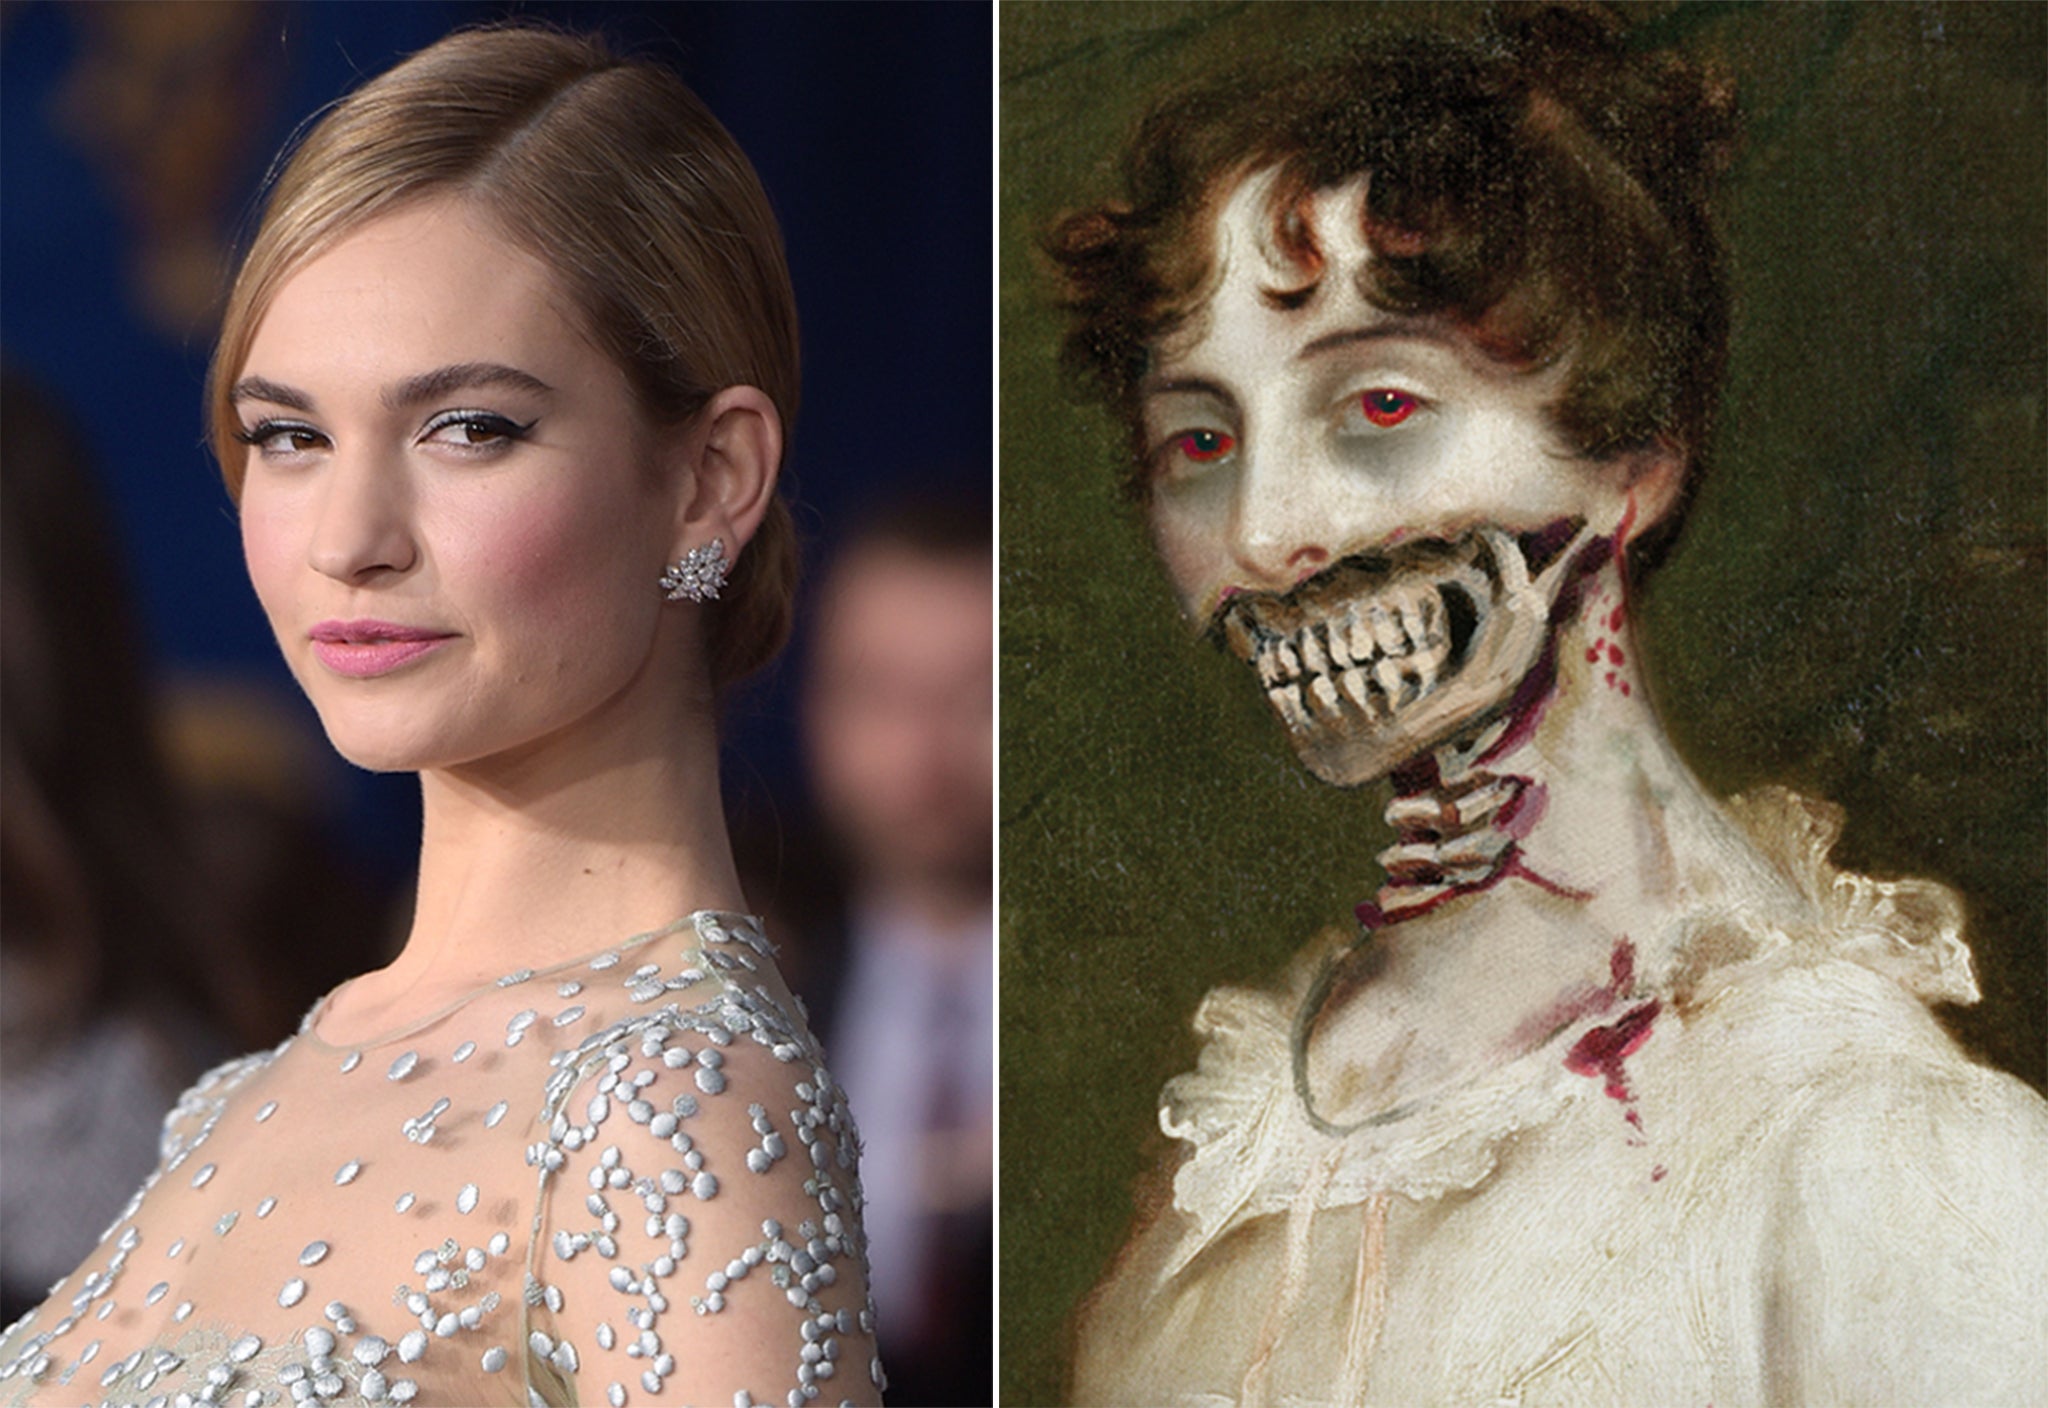 Lily James will star as Elizabeth Bennet in the film adaptation of Pride and Prejudice and Zombies